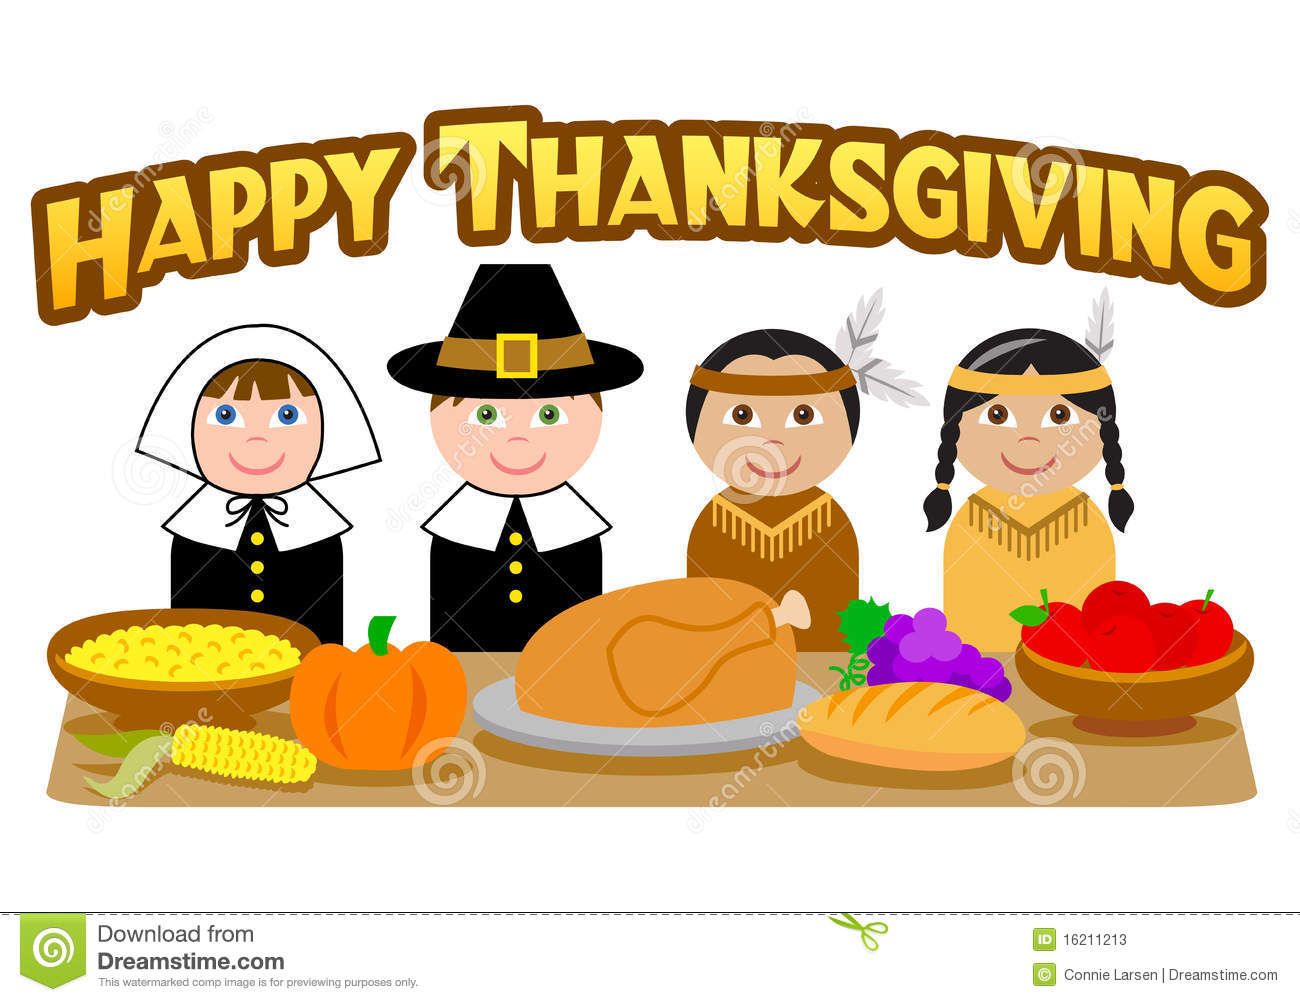 Thanksgiving Pilgrims And Indians Eps Stock Photos   Image  16211213